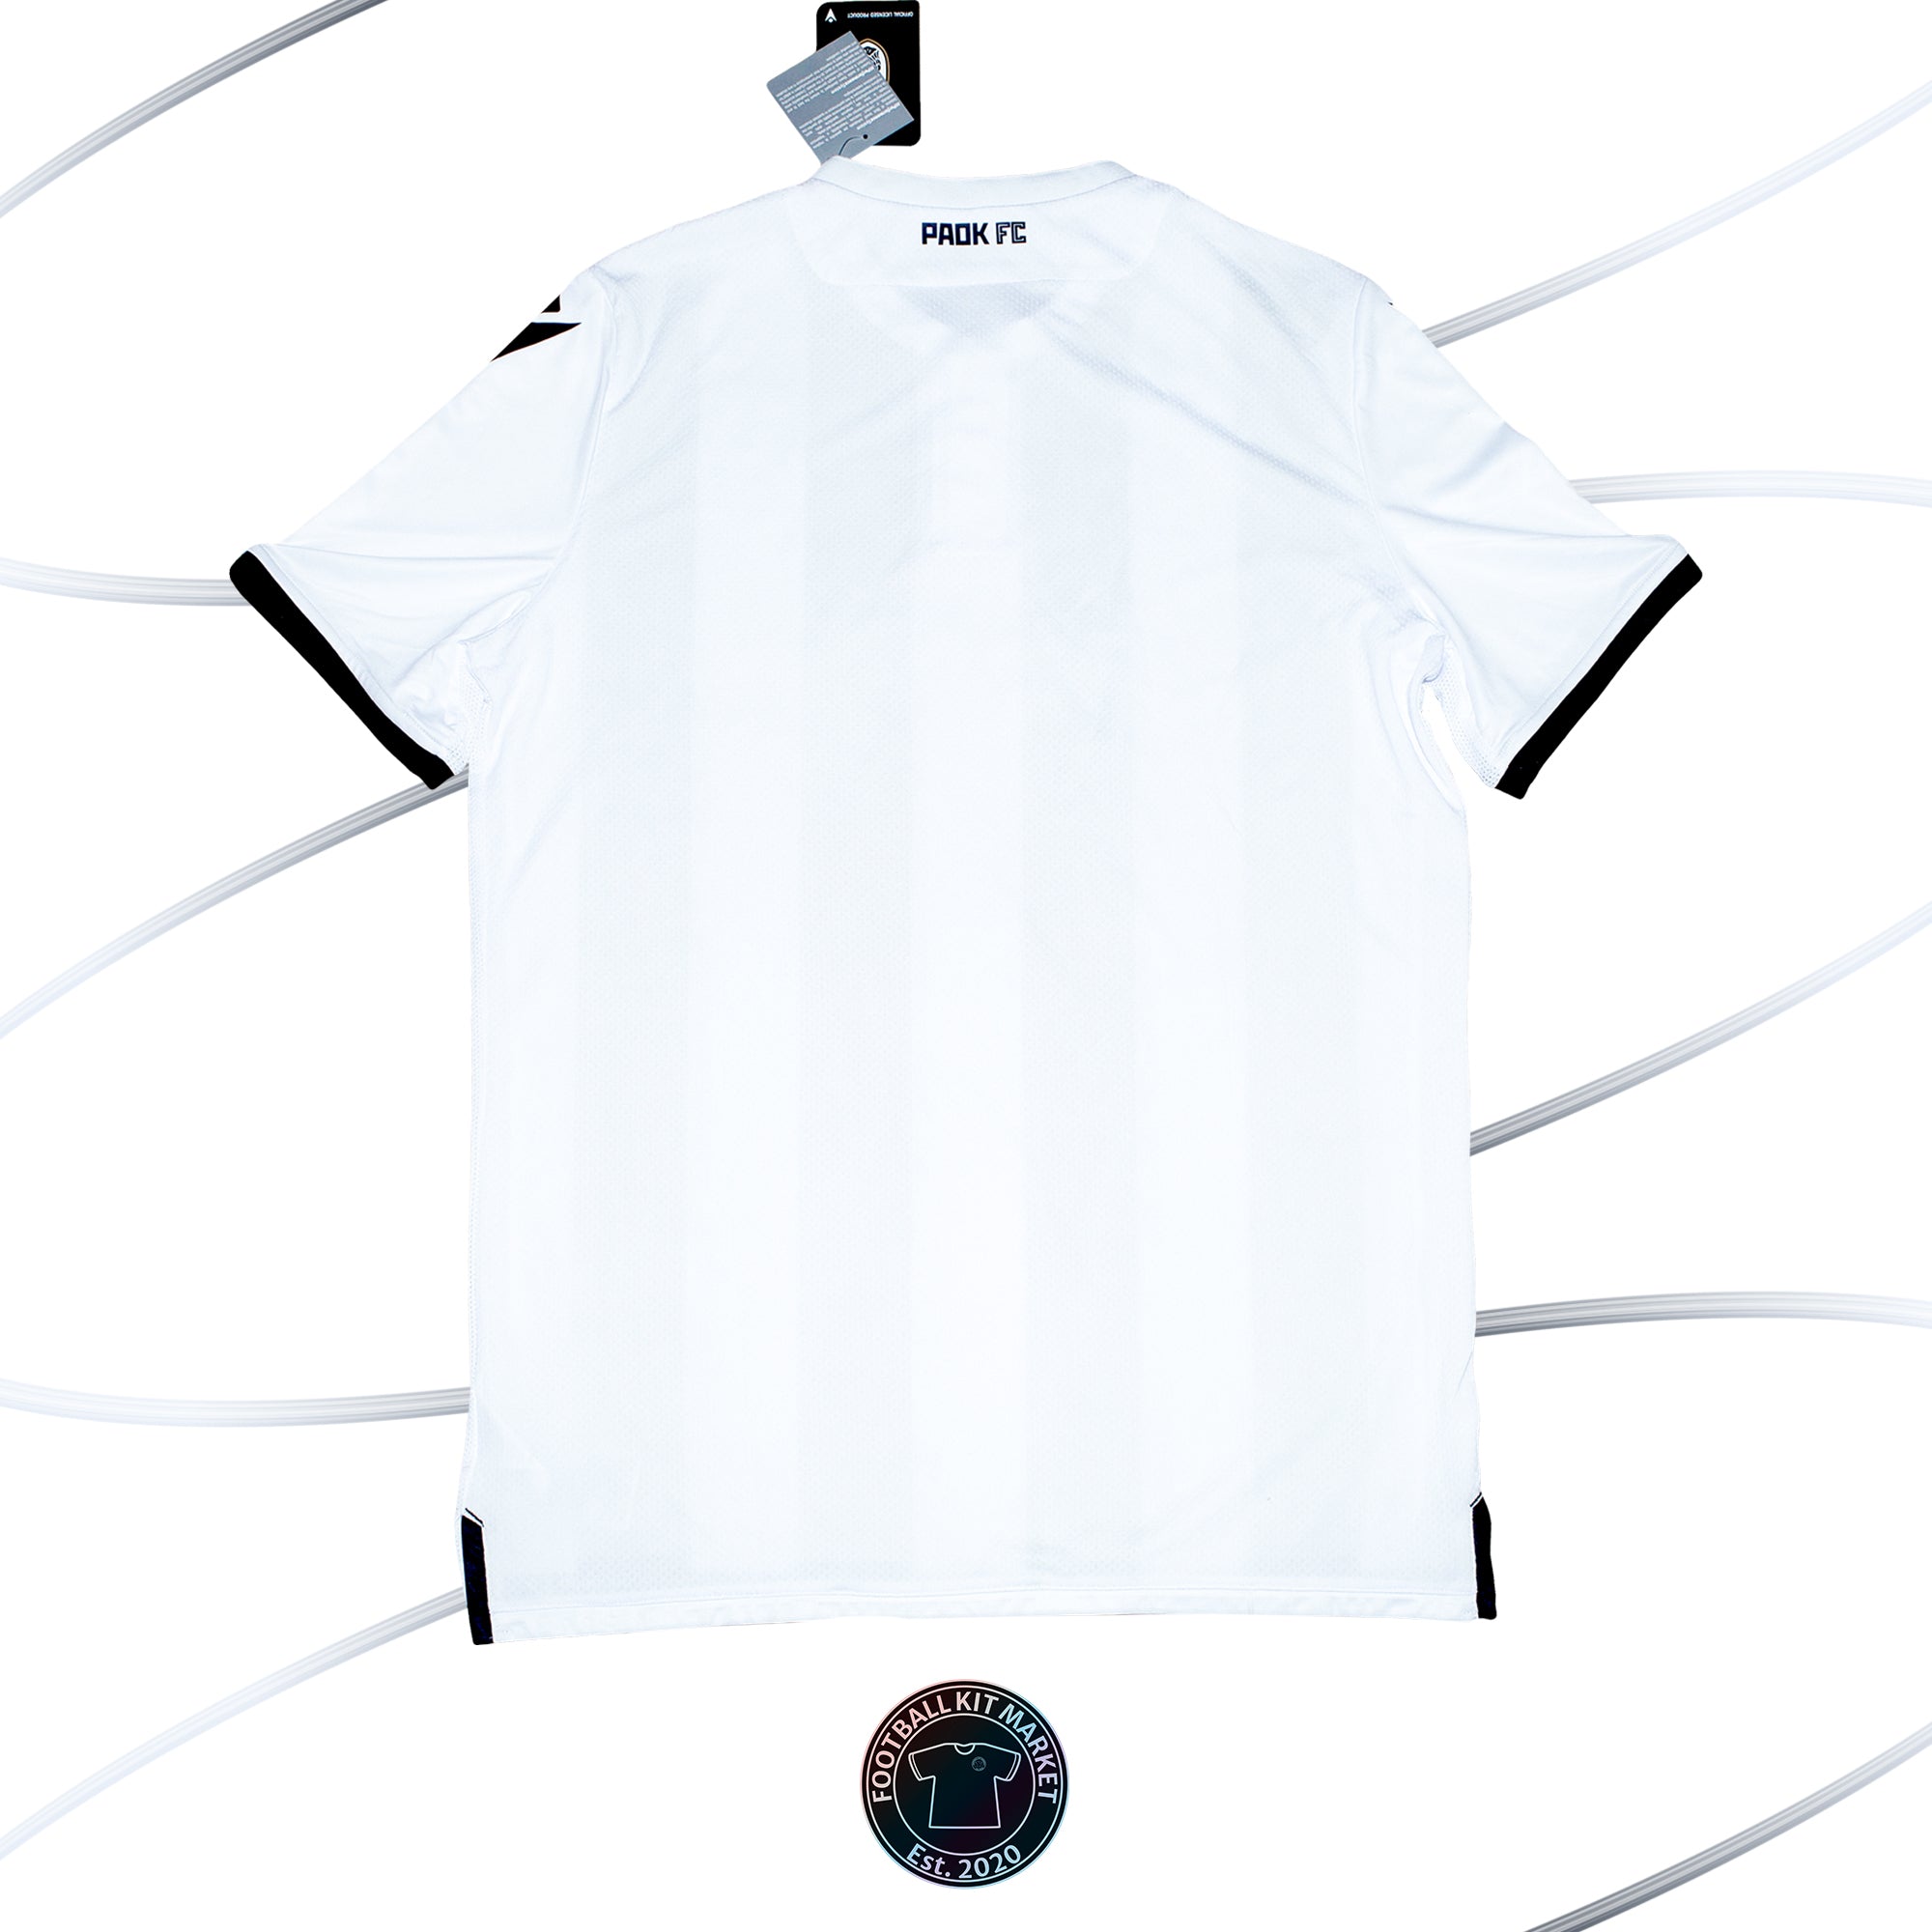 Genuine PAOK Home (2019-2020) - MACRON (XL) - Product Image from Football Kit Market